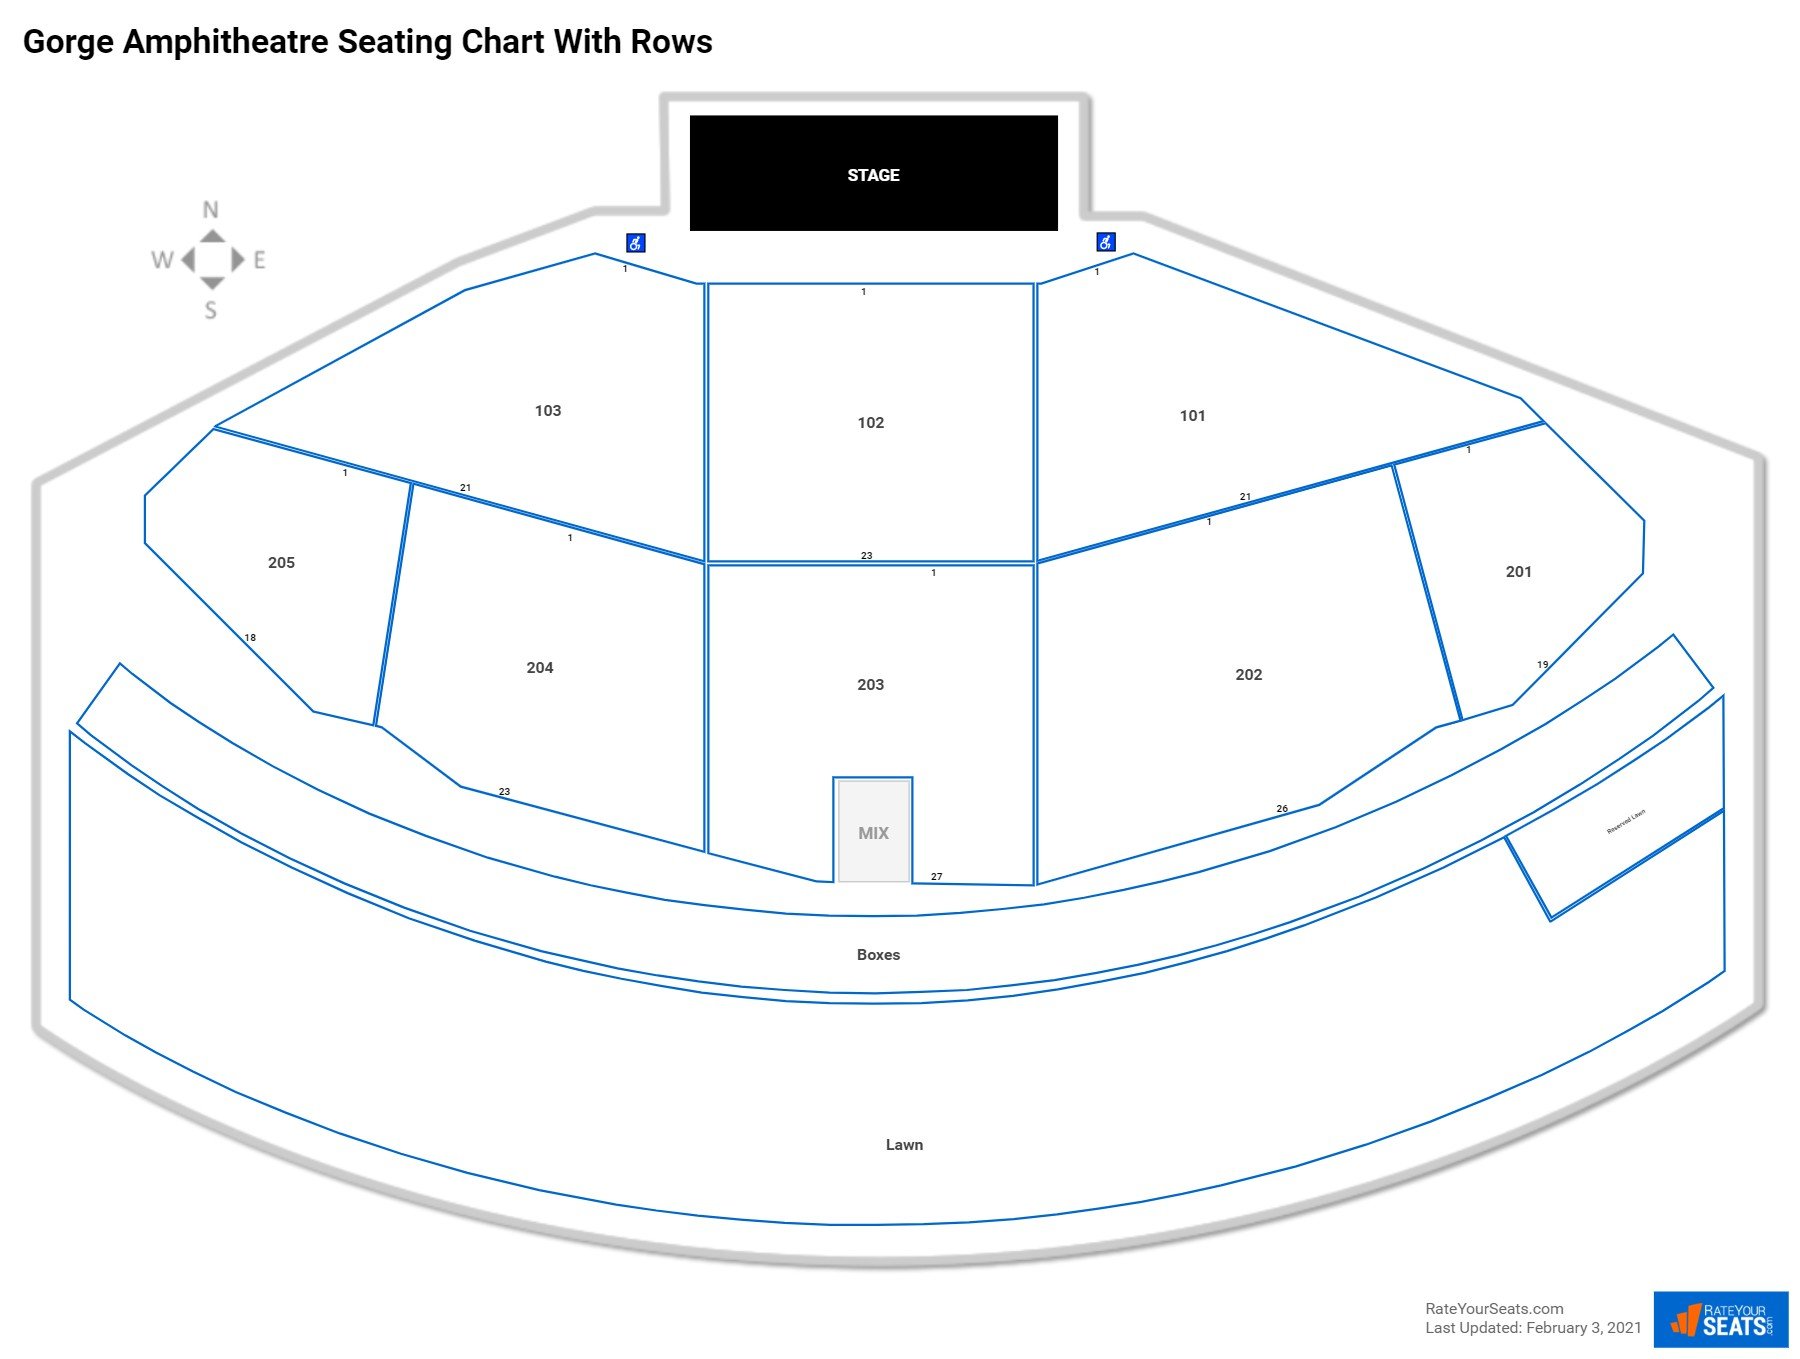 Gorge Amphitheatre seating chart with row numbers